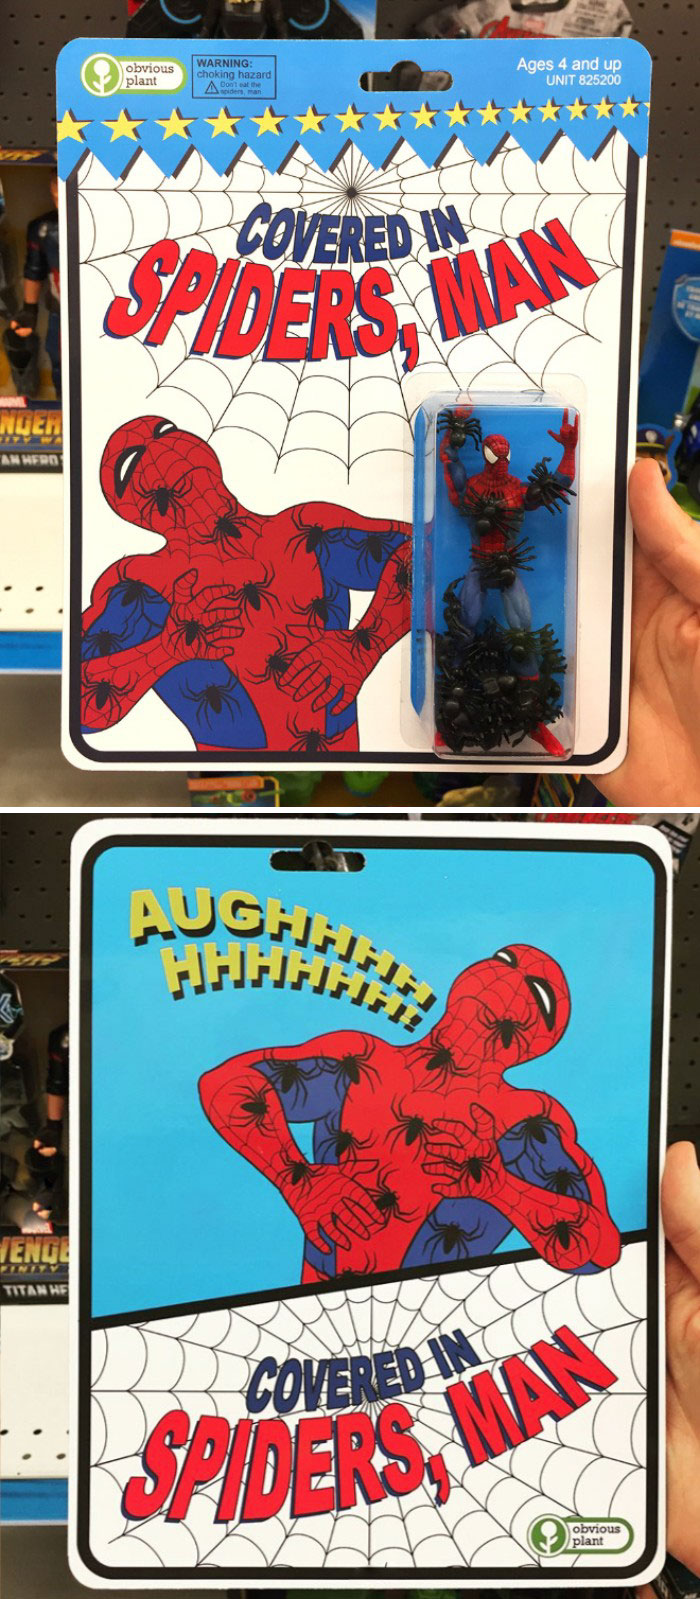 obvious plant toys - obvious plant Warning choking hazard wider man Ages 4 and up Unit 825200 Aotea tt ttt Covered In The Man Nden An Werd Aughe Hhhheeee Engl Titan We obvious plant